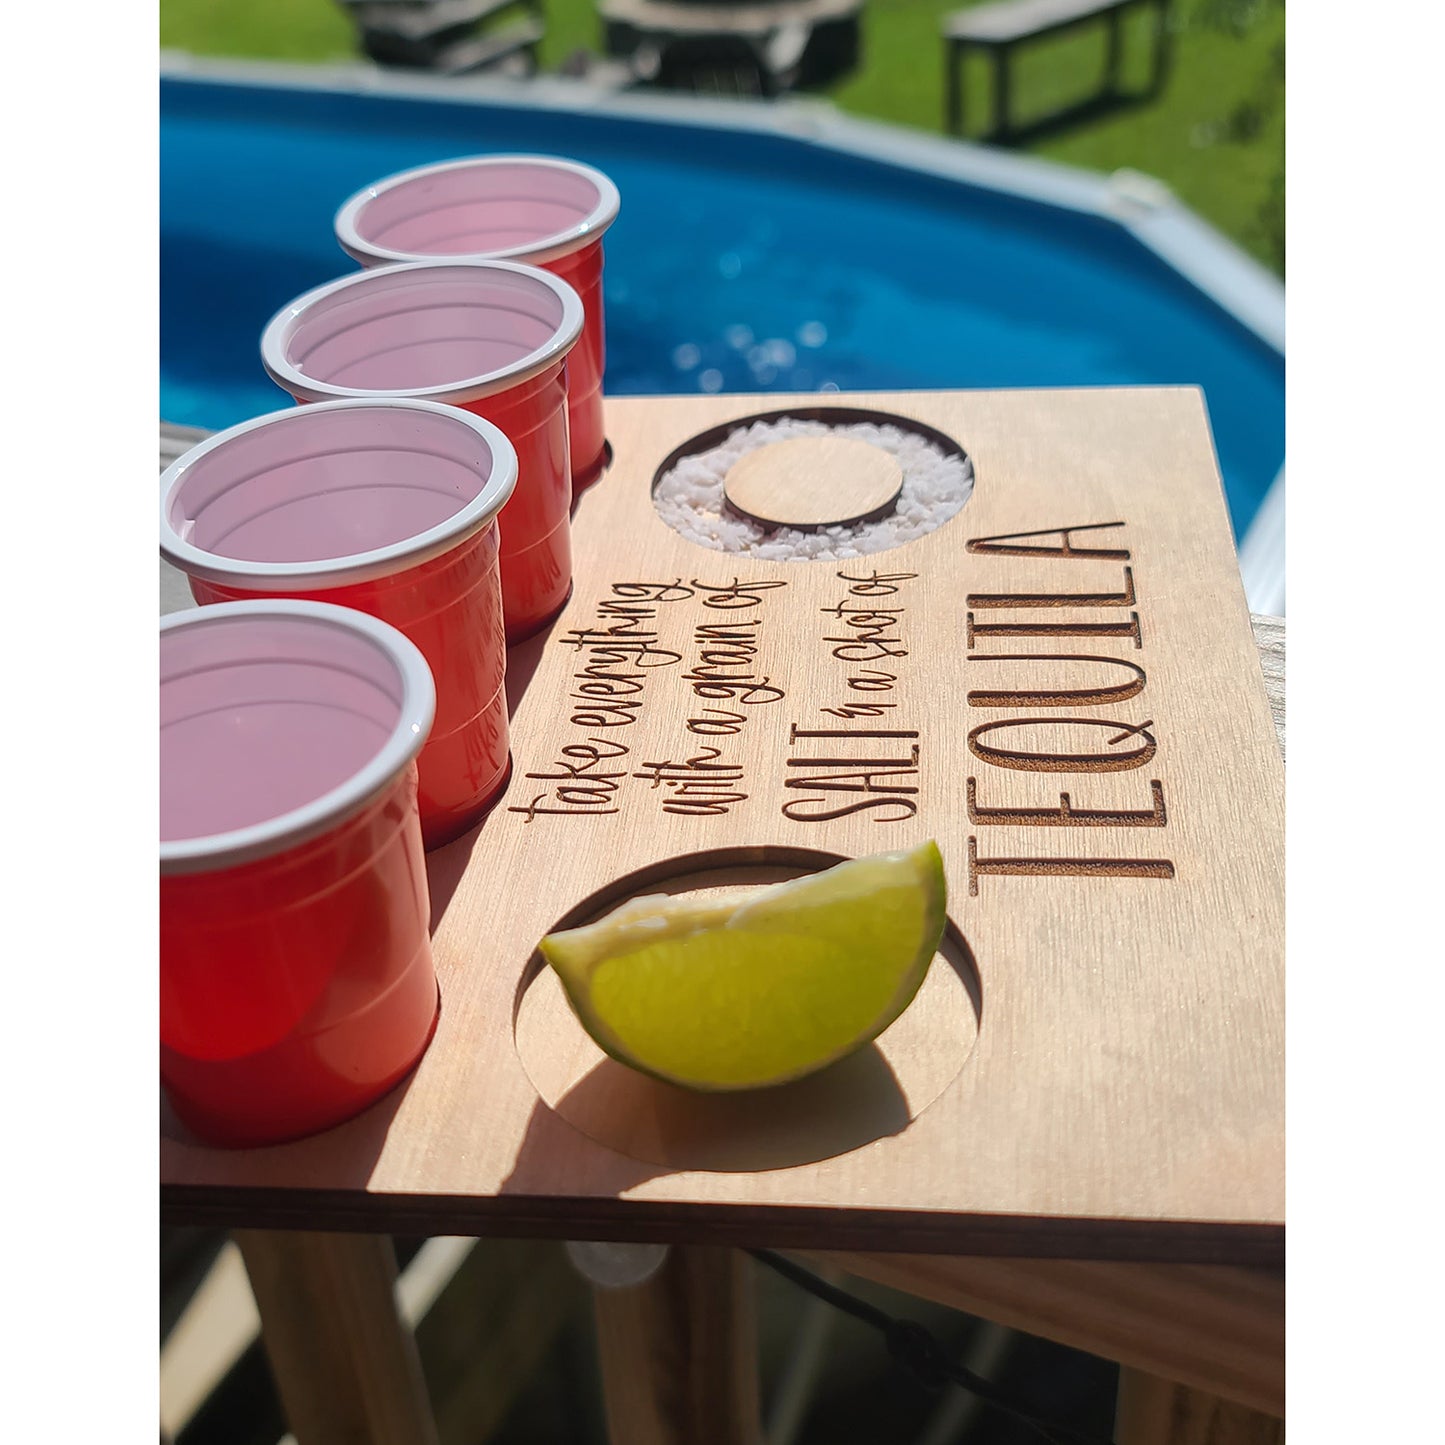 Customizable Summer Shot Board - "Take everything with a grain of salt and a shot of TEQUILA"